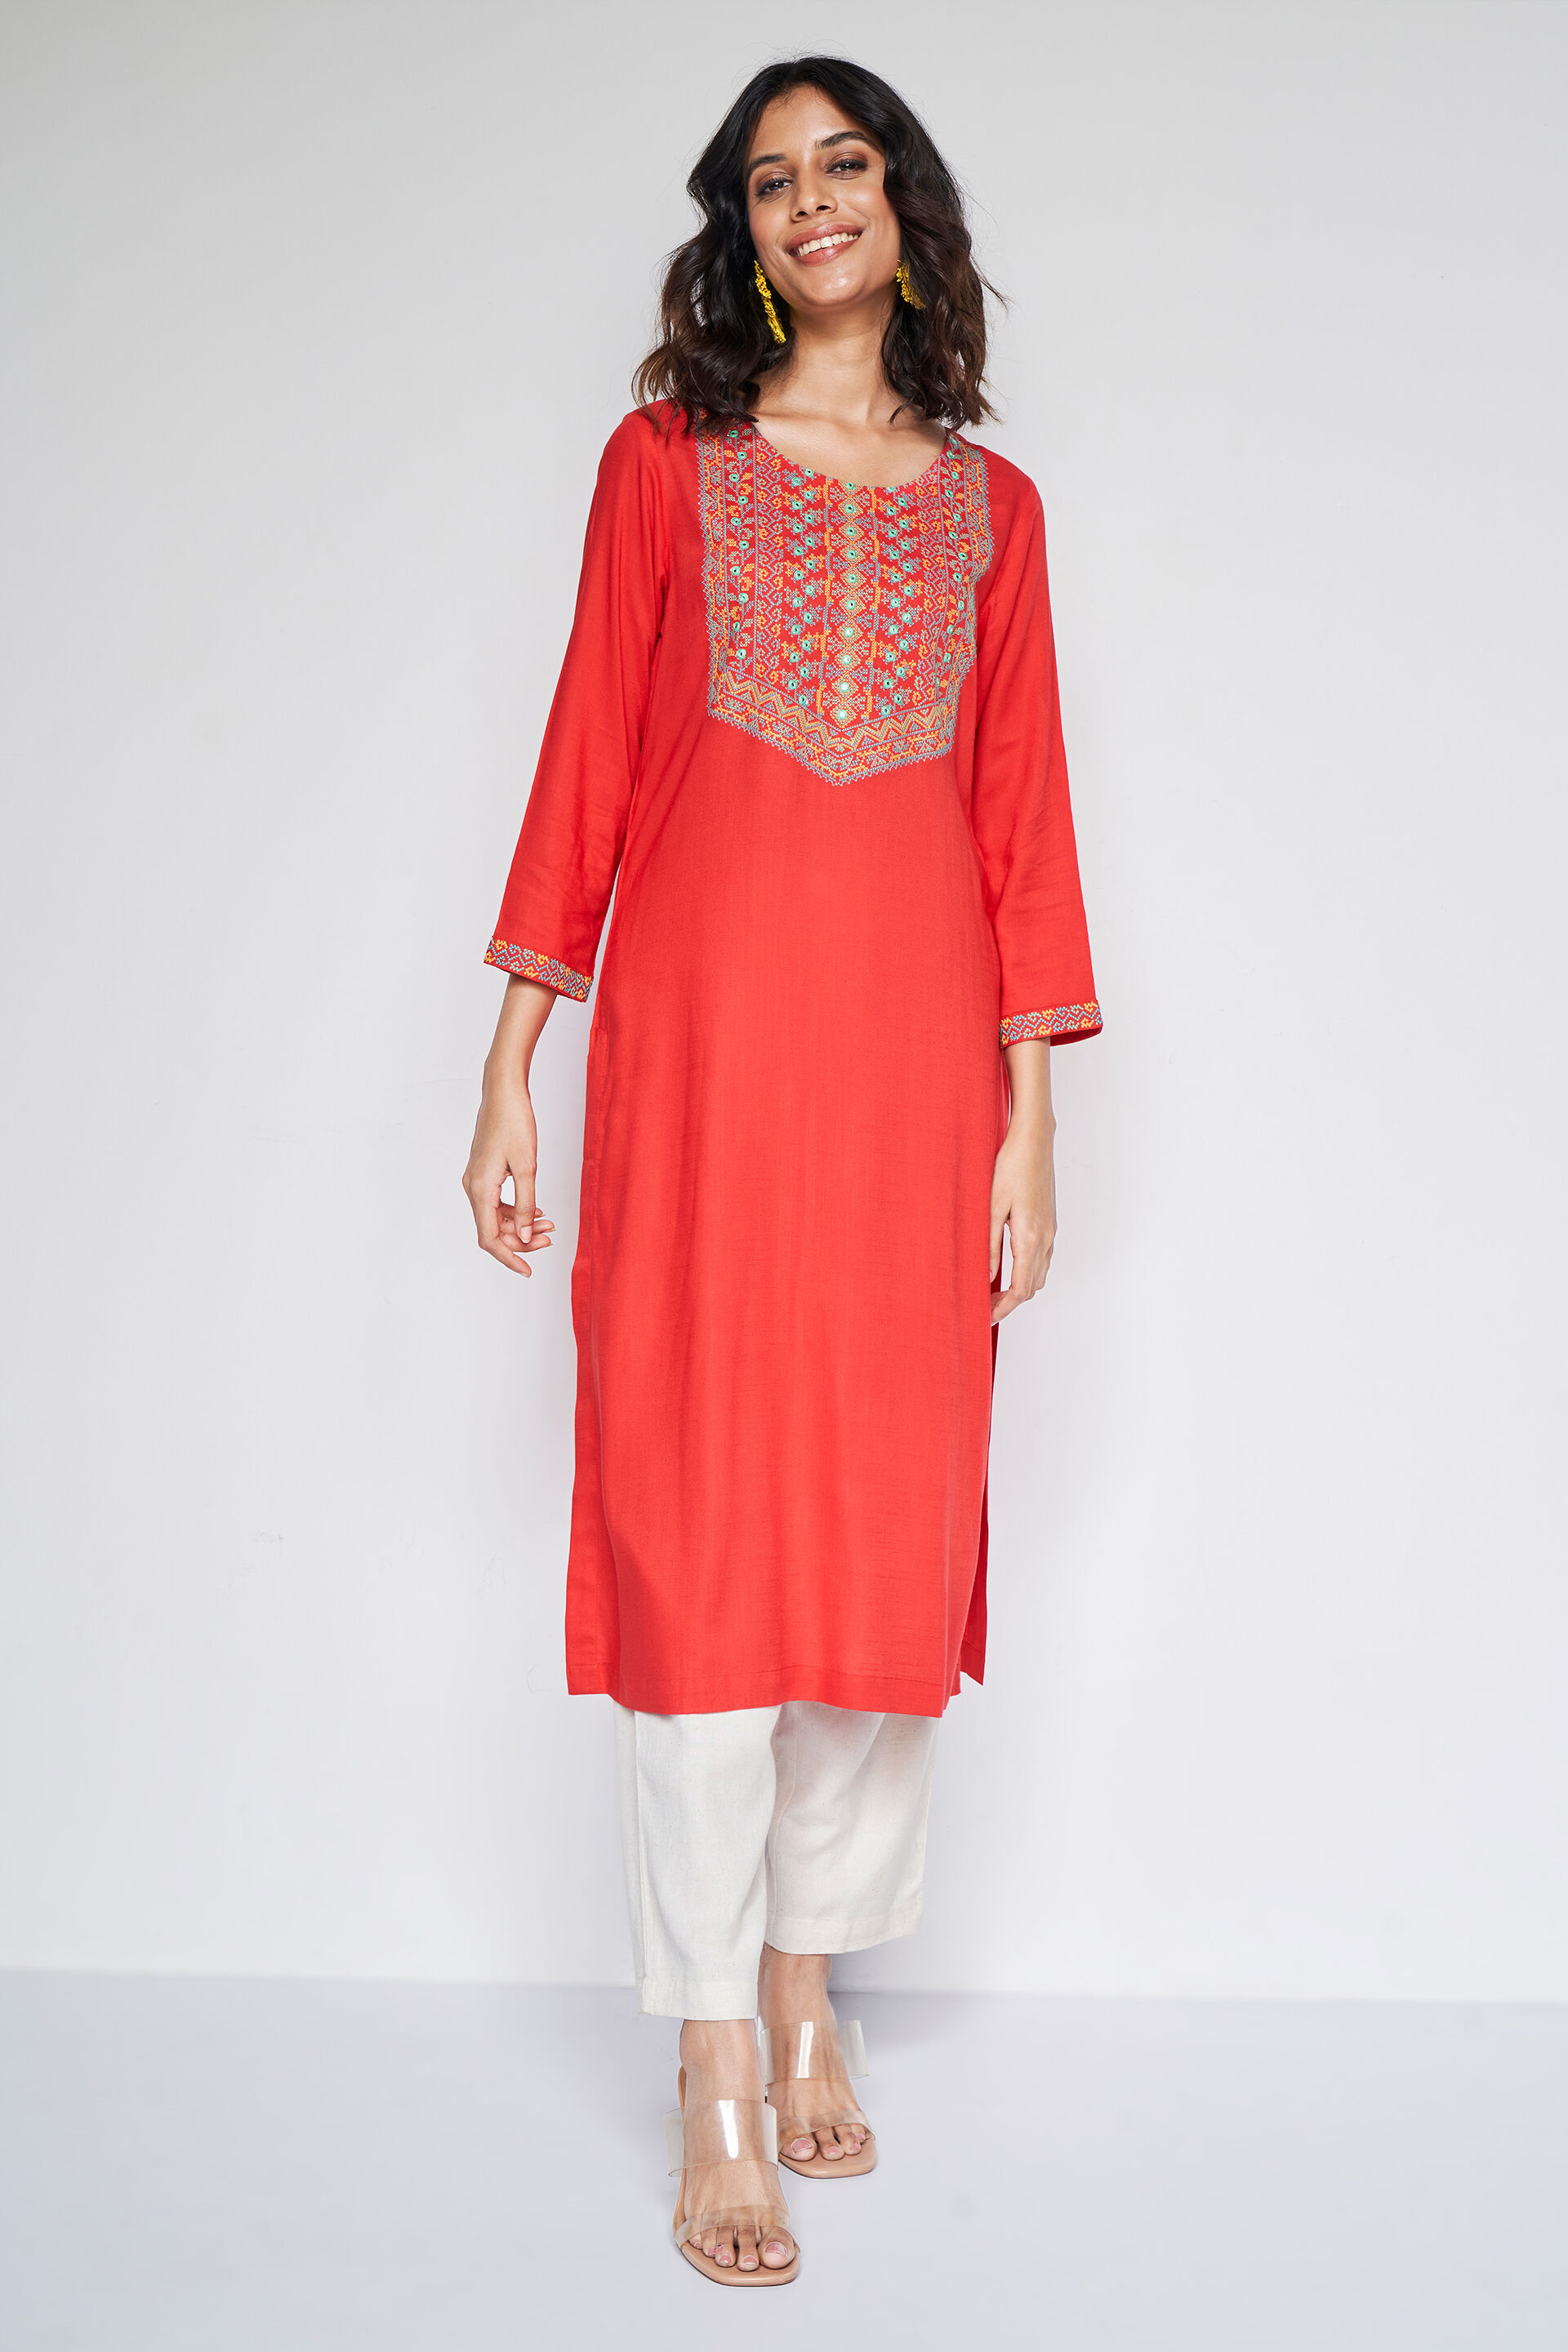 Buy Red & Black Kurti with Pants Set Online in India